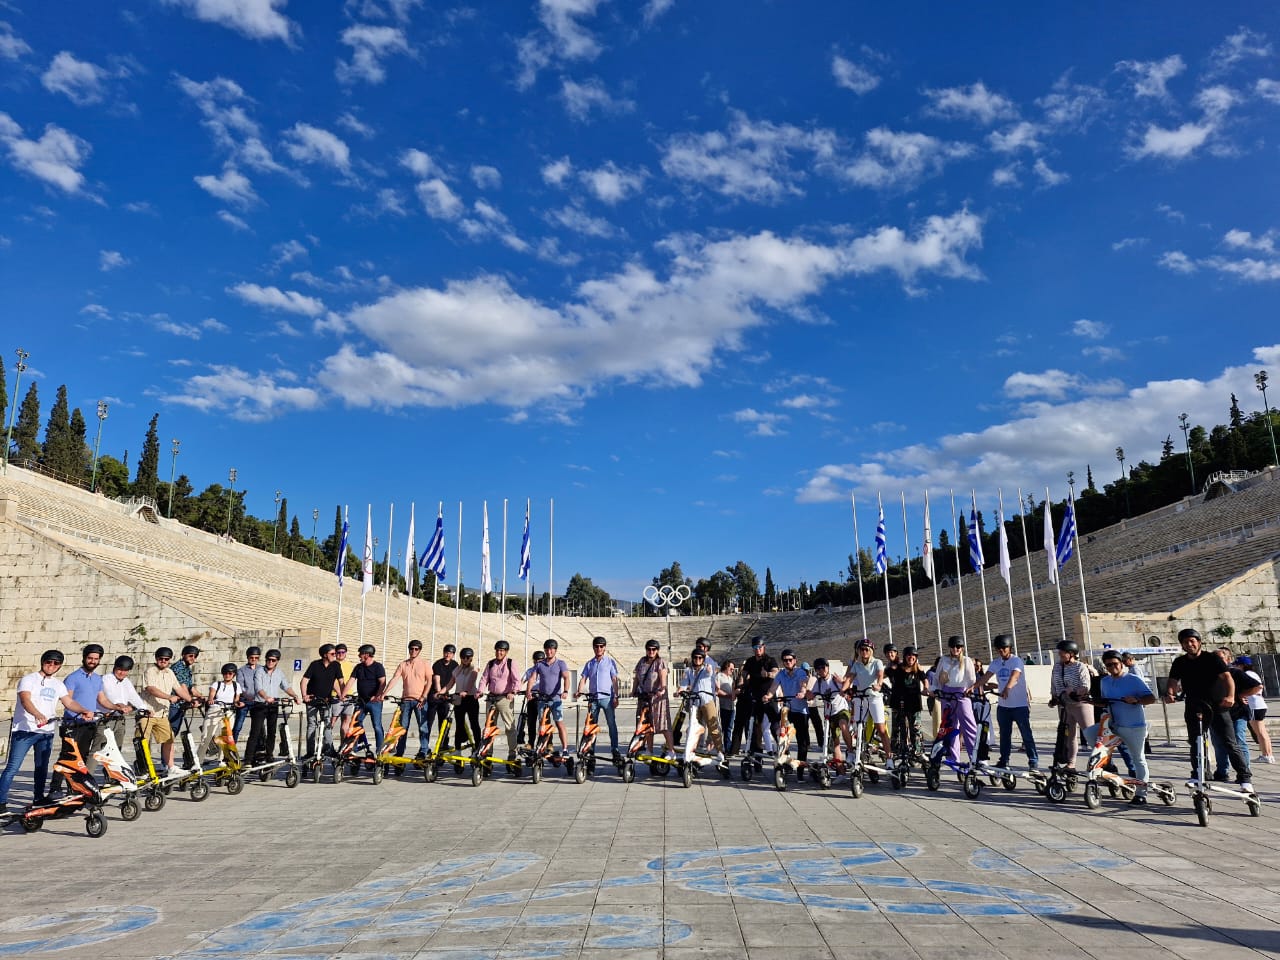 Panathenaic Stadium with a team of trikke scooters. An Athens tour by Scooterise guides in a sunny weather, suitable for families with kids.